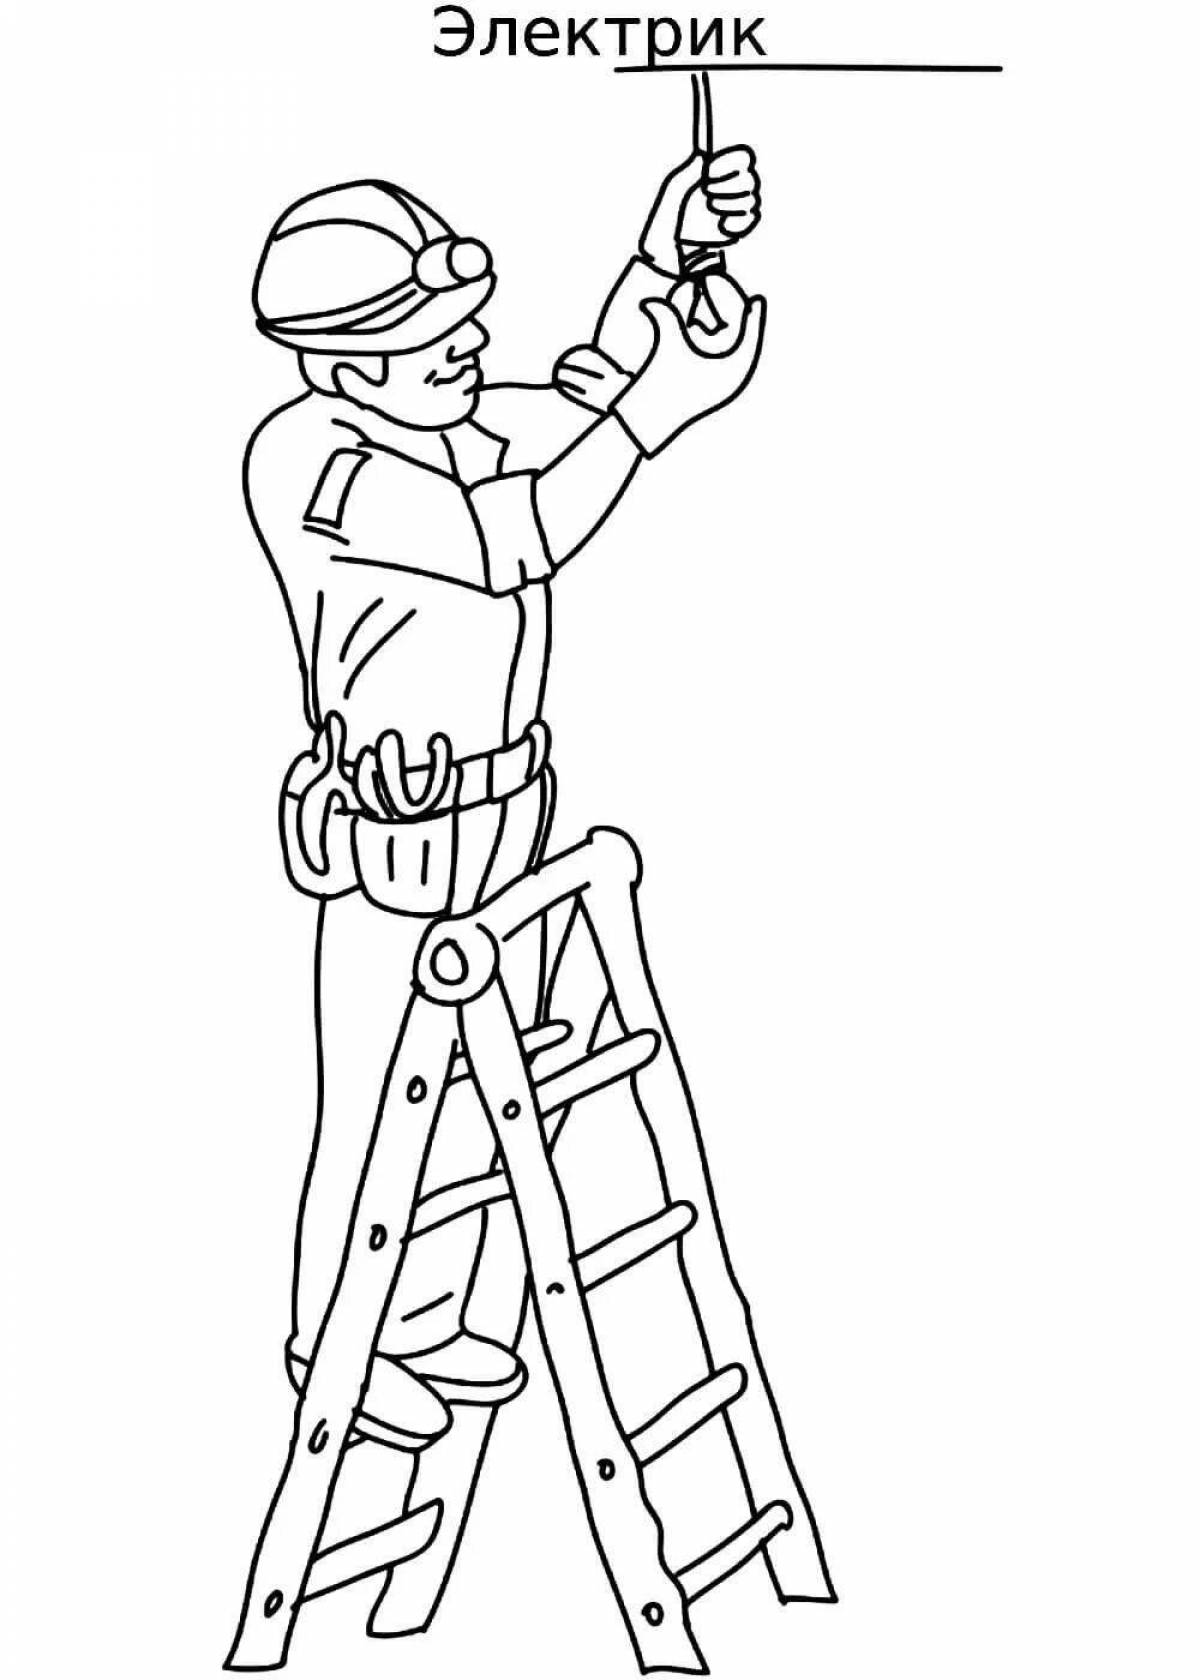 Bright electrician coloring page